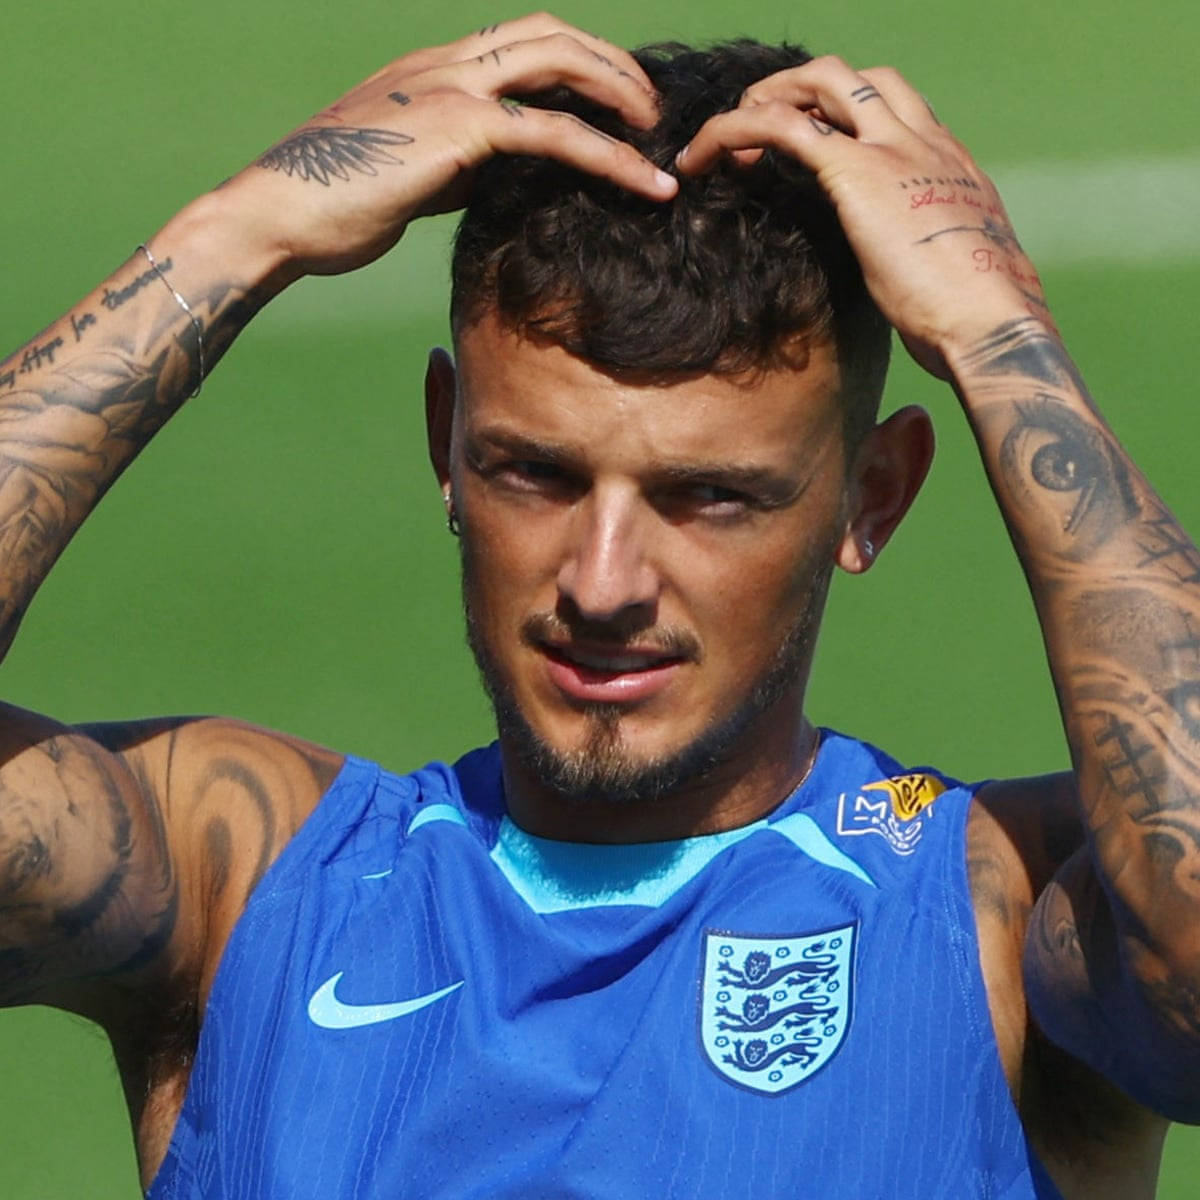 Ben White of Arsenal reveals a tattoo on his back as he speaks to Rob  News Photo  Getty Images